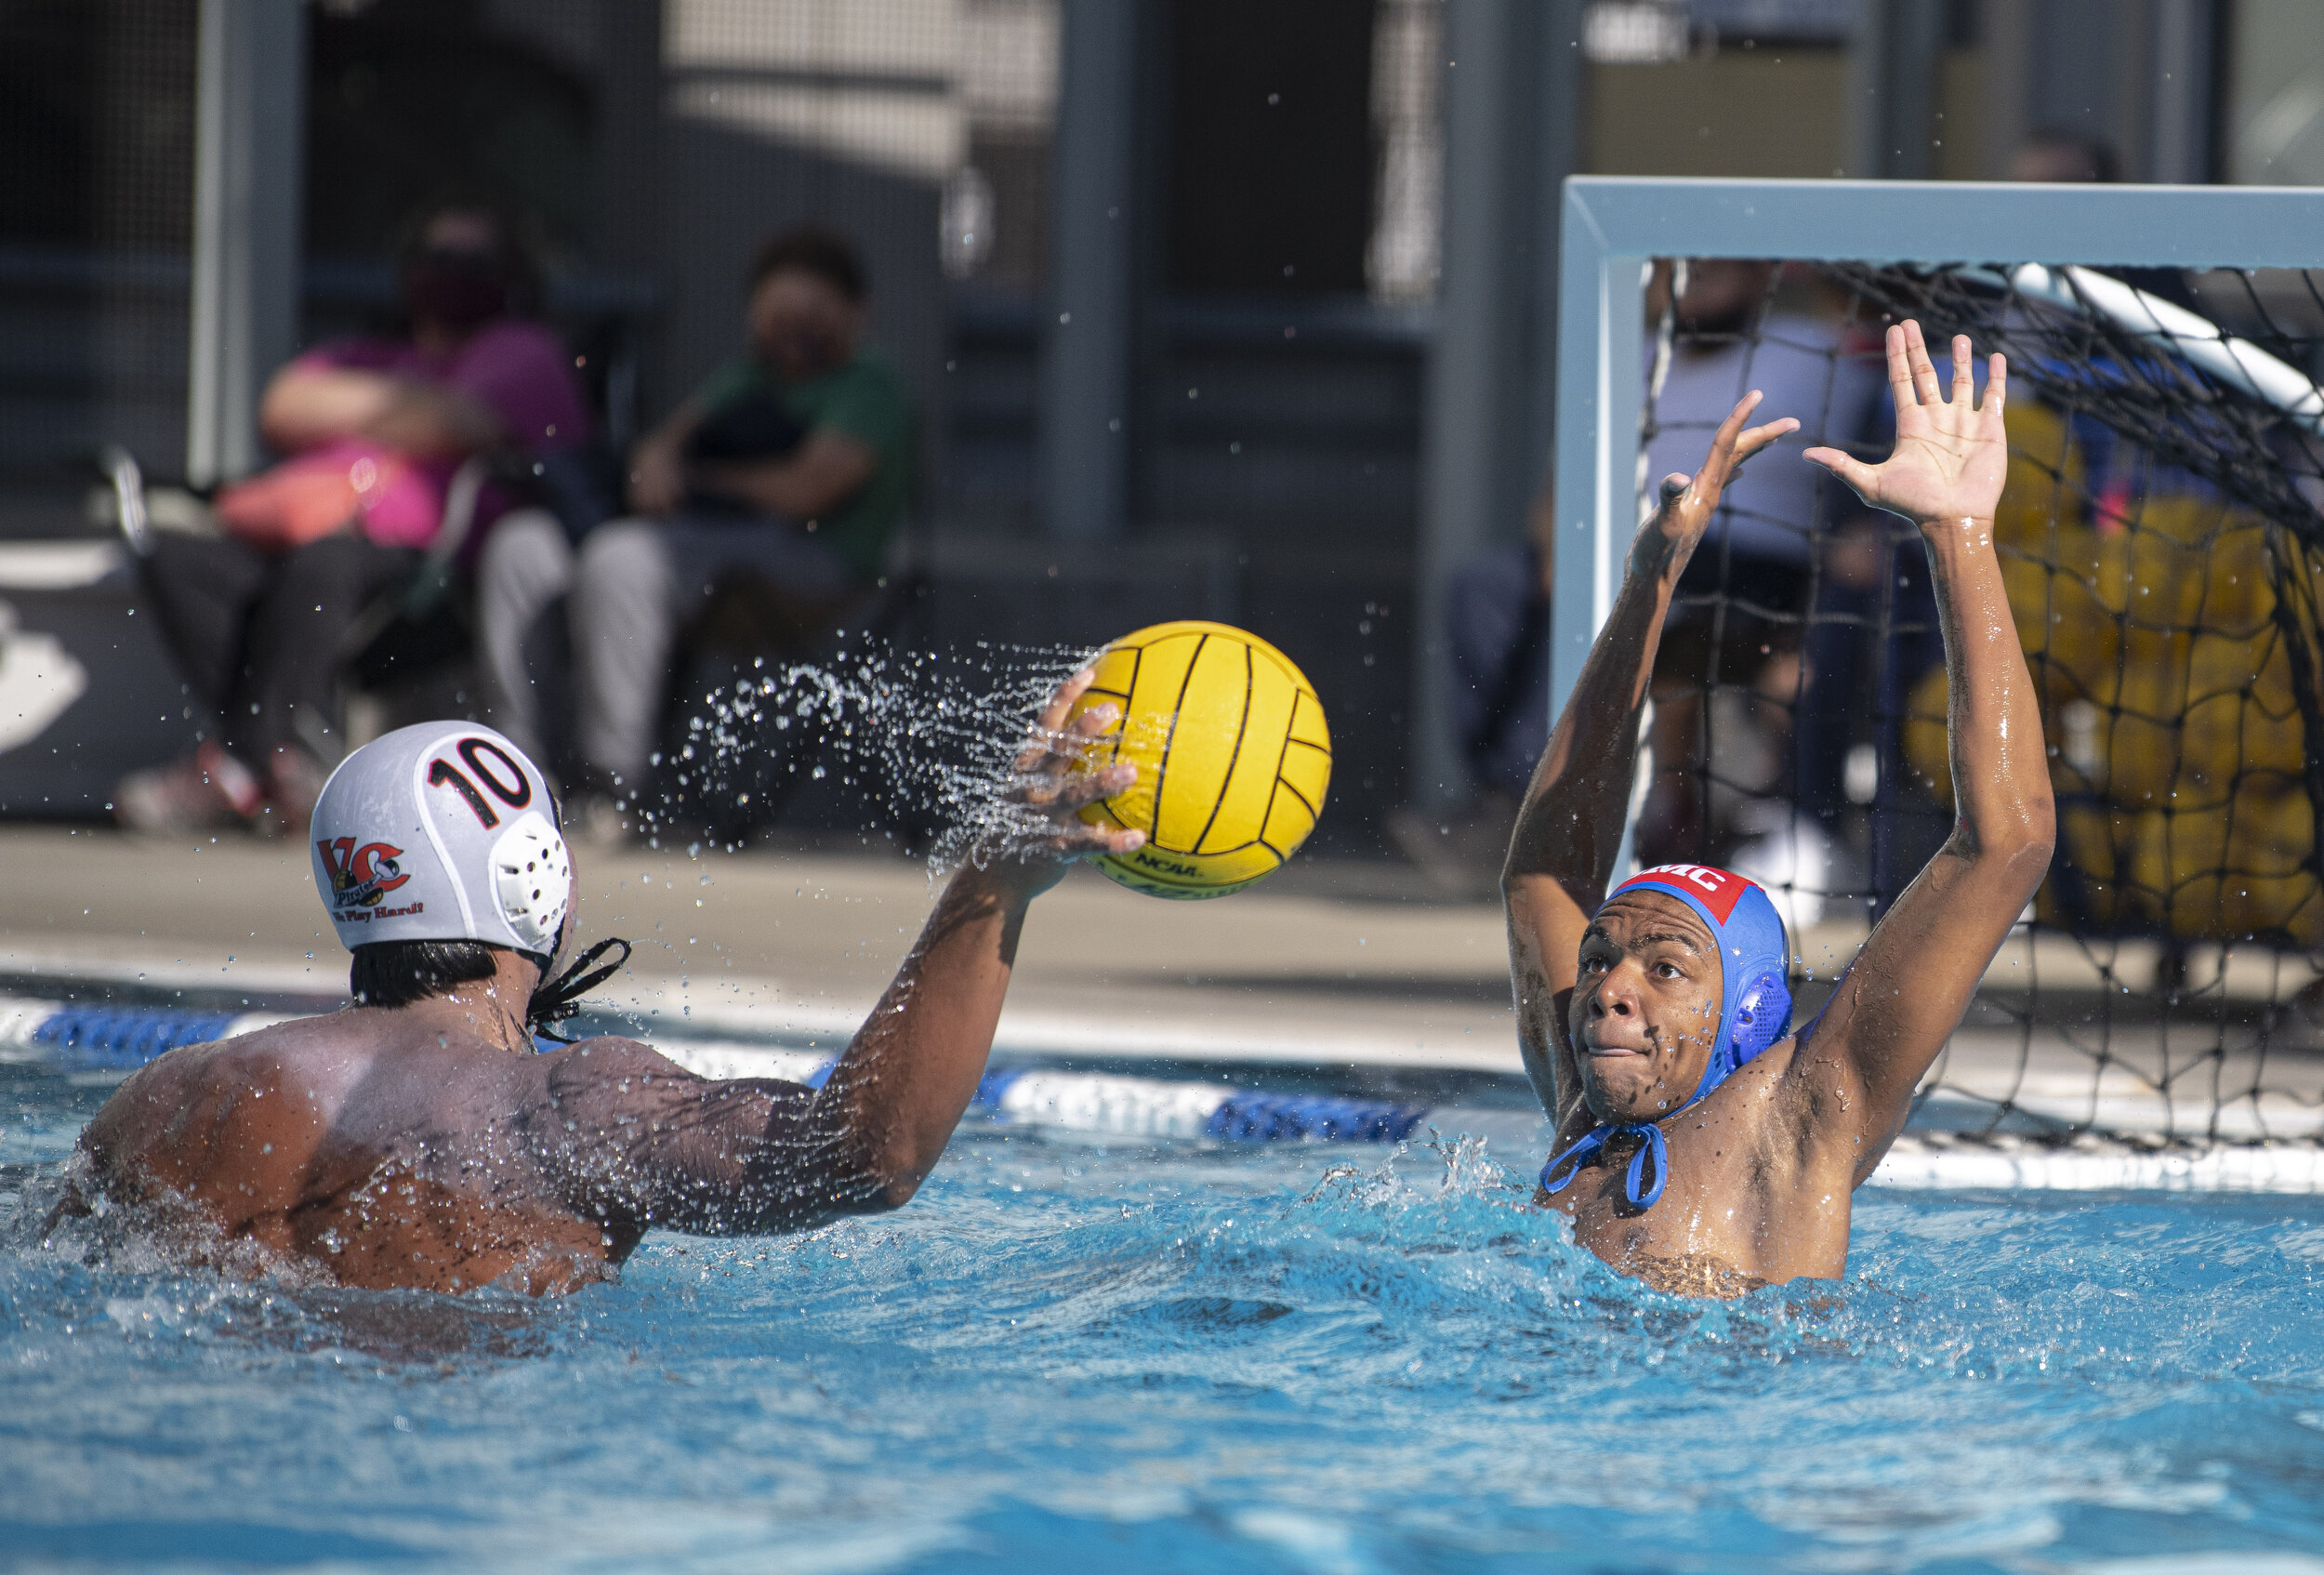  Santa Monica College Corsairs freshman Elijah Bell (1) the goalie of the team, throws his hand up to defend a face to face shot from a Ventura College player. (Jon Putman | The Corsair) 